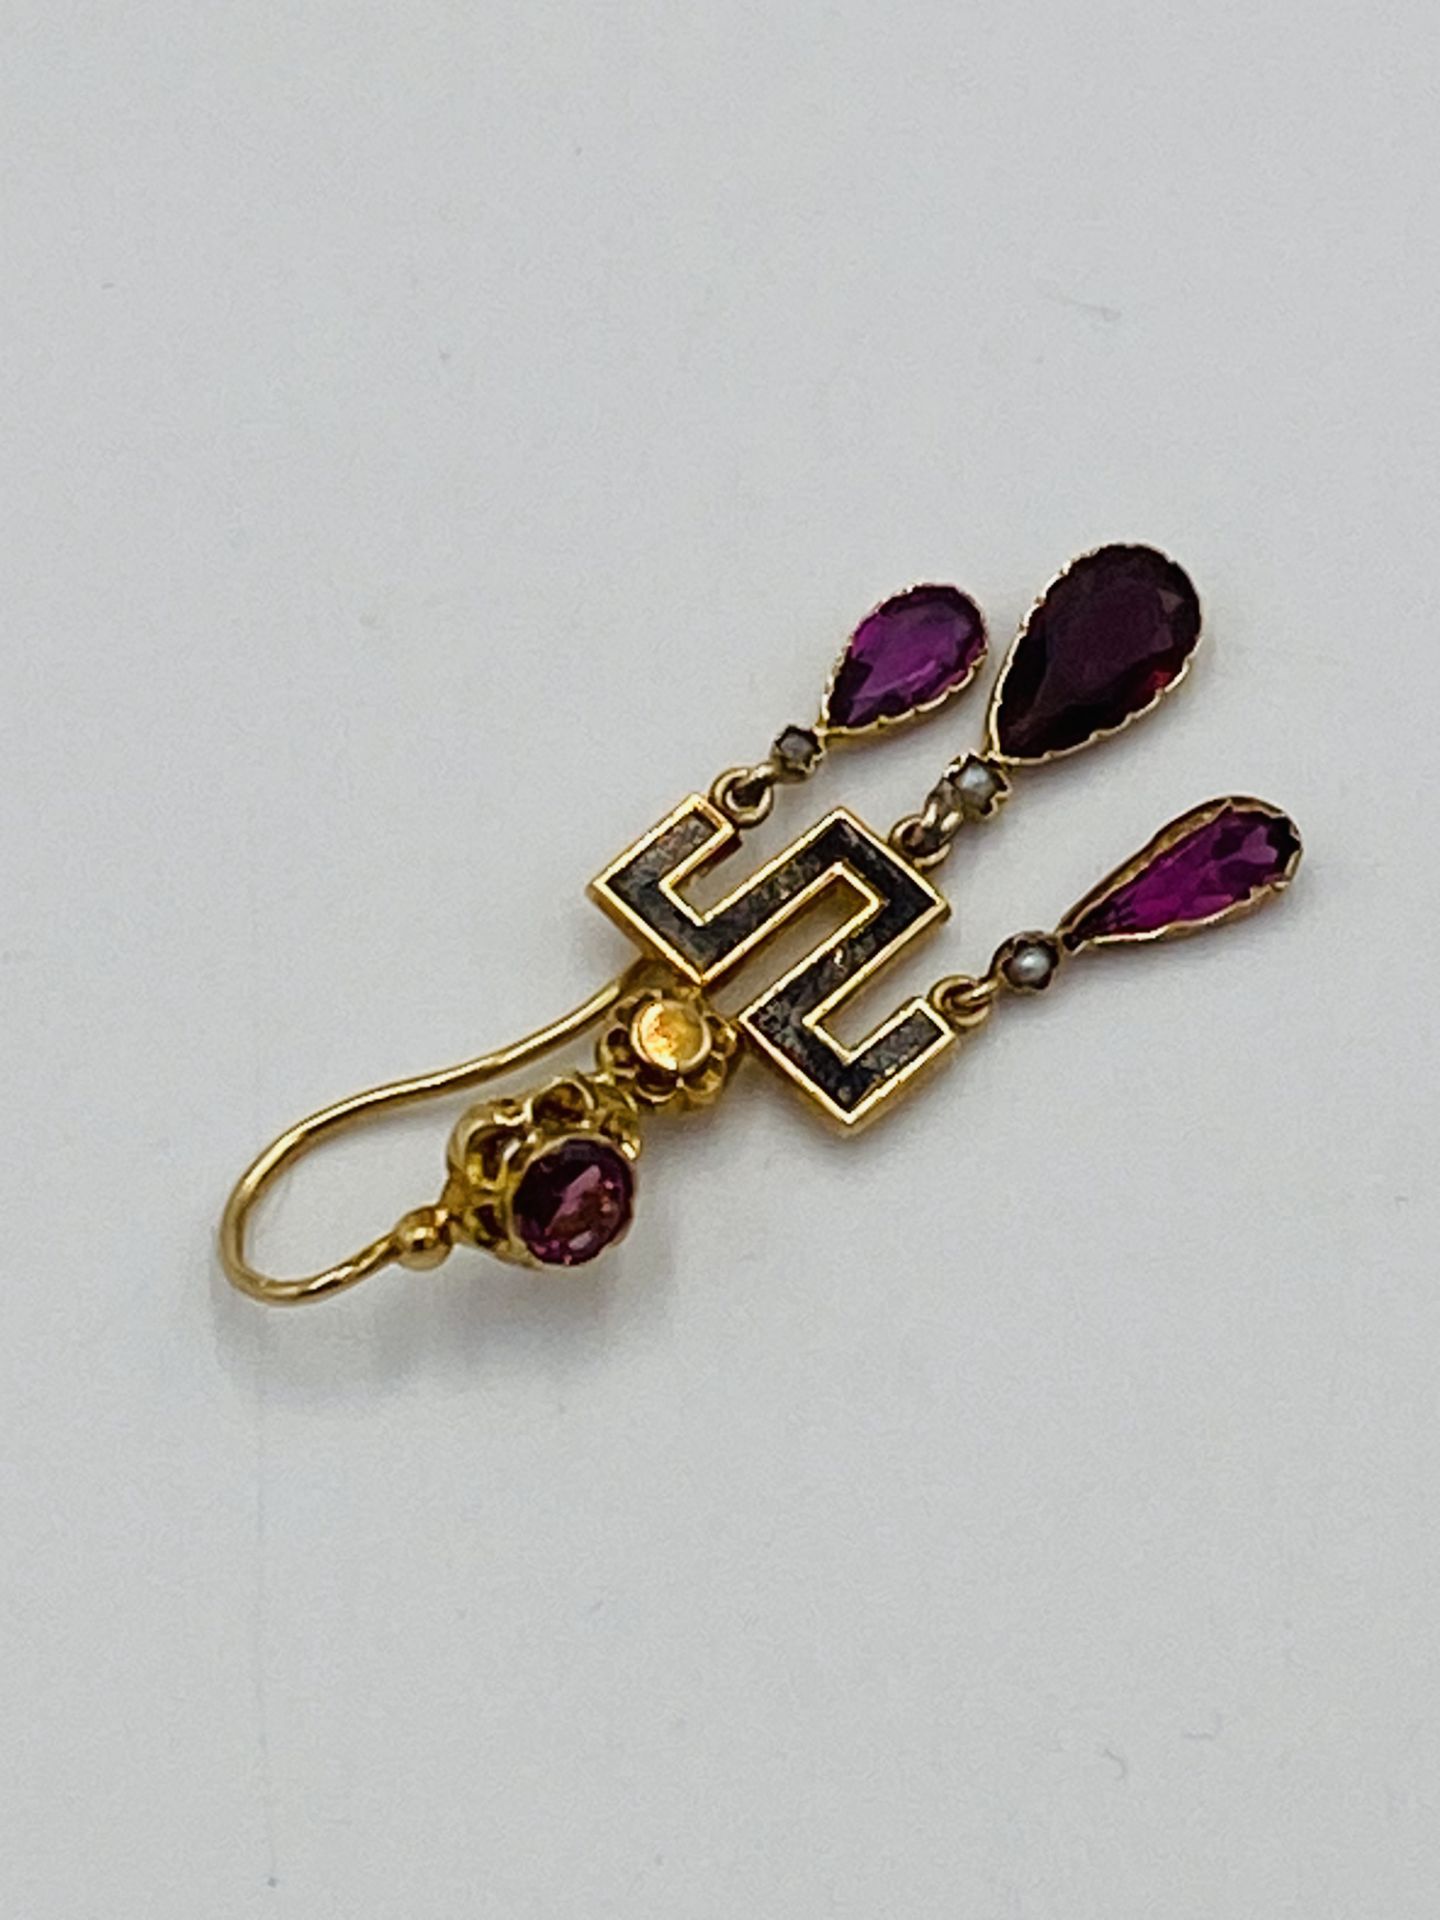 18ct gold, amethyst and seed pearl earrings - Image 3 of 4